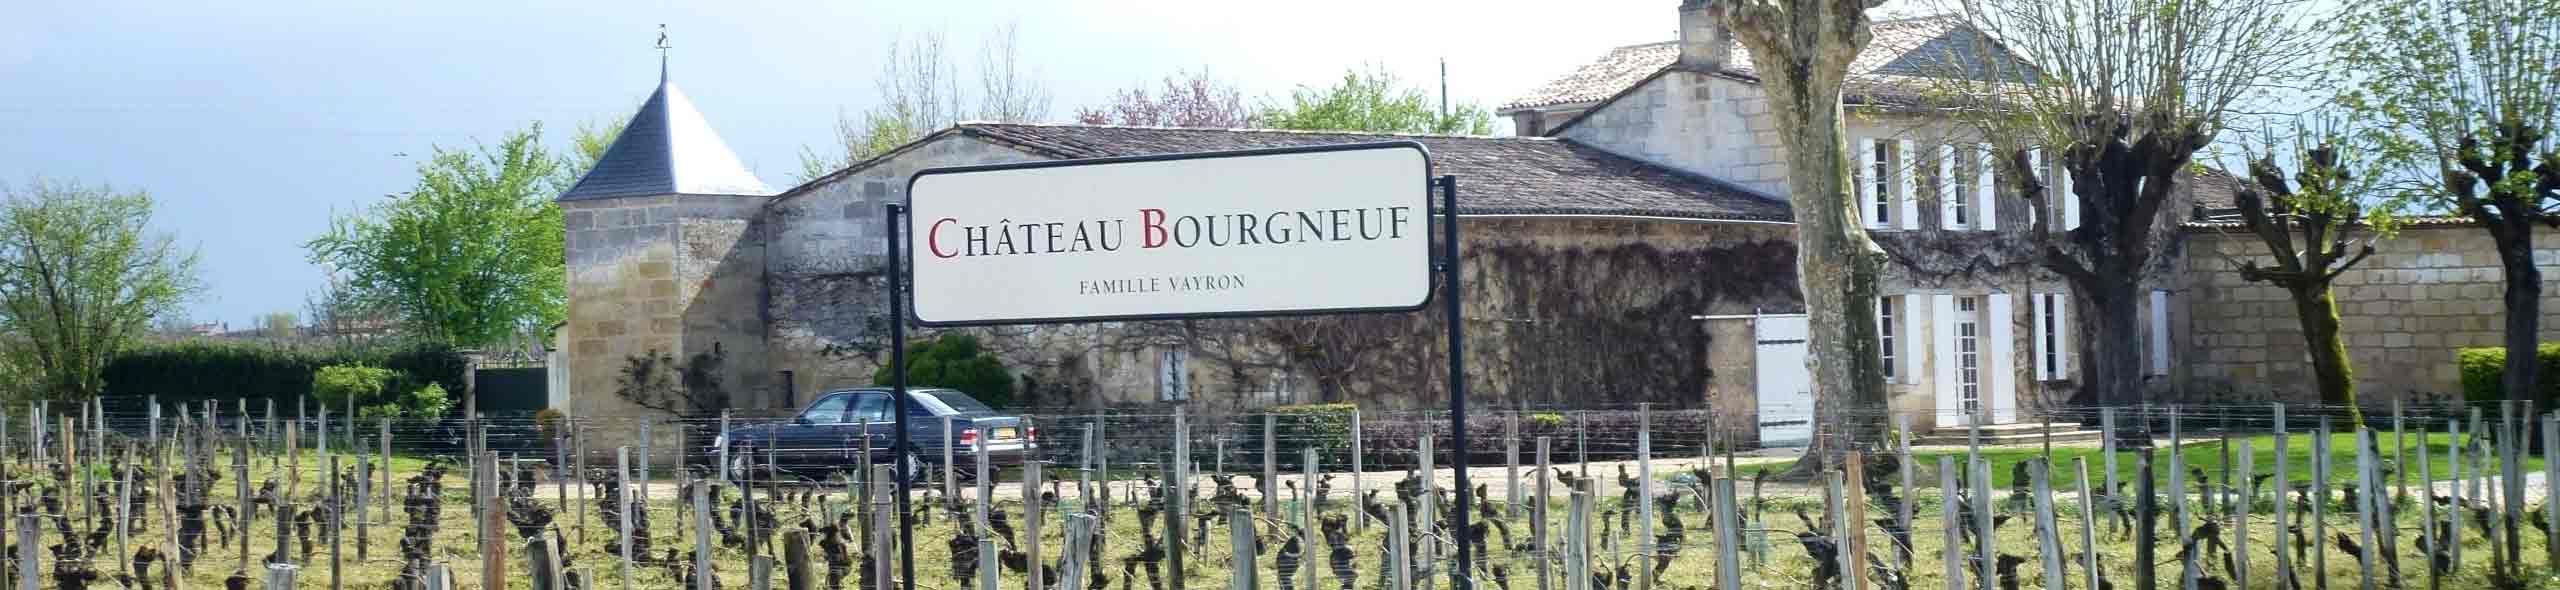 Château Bourgneuf